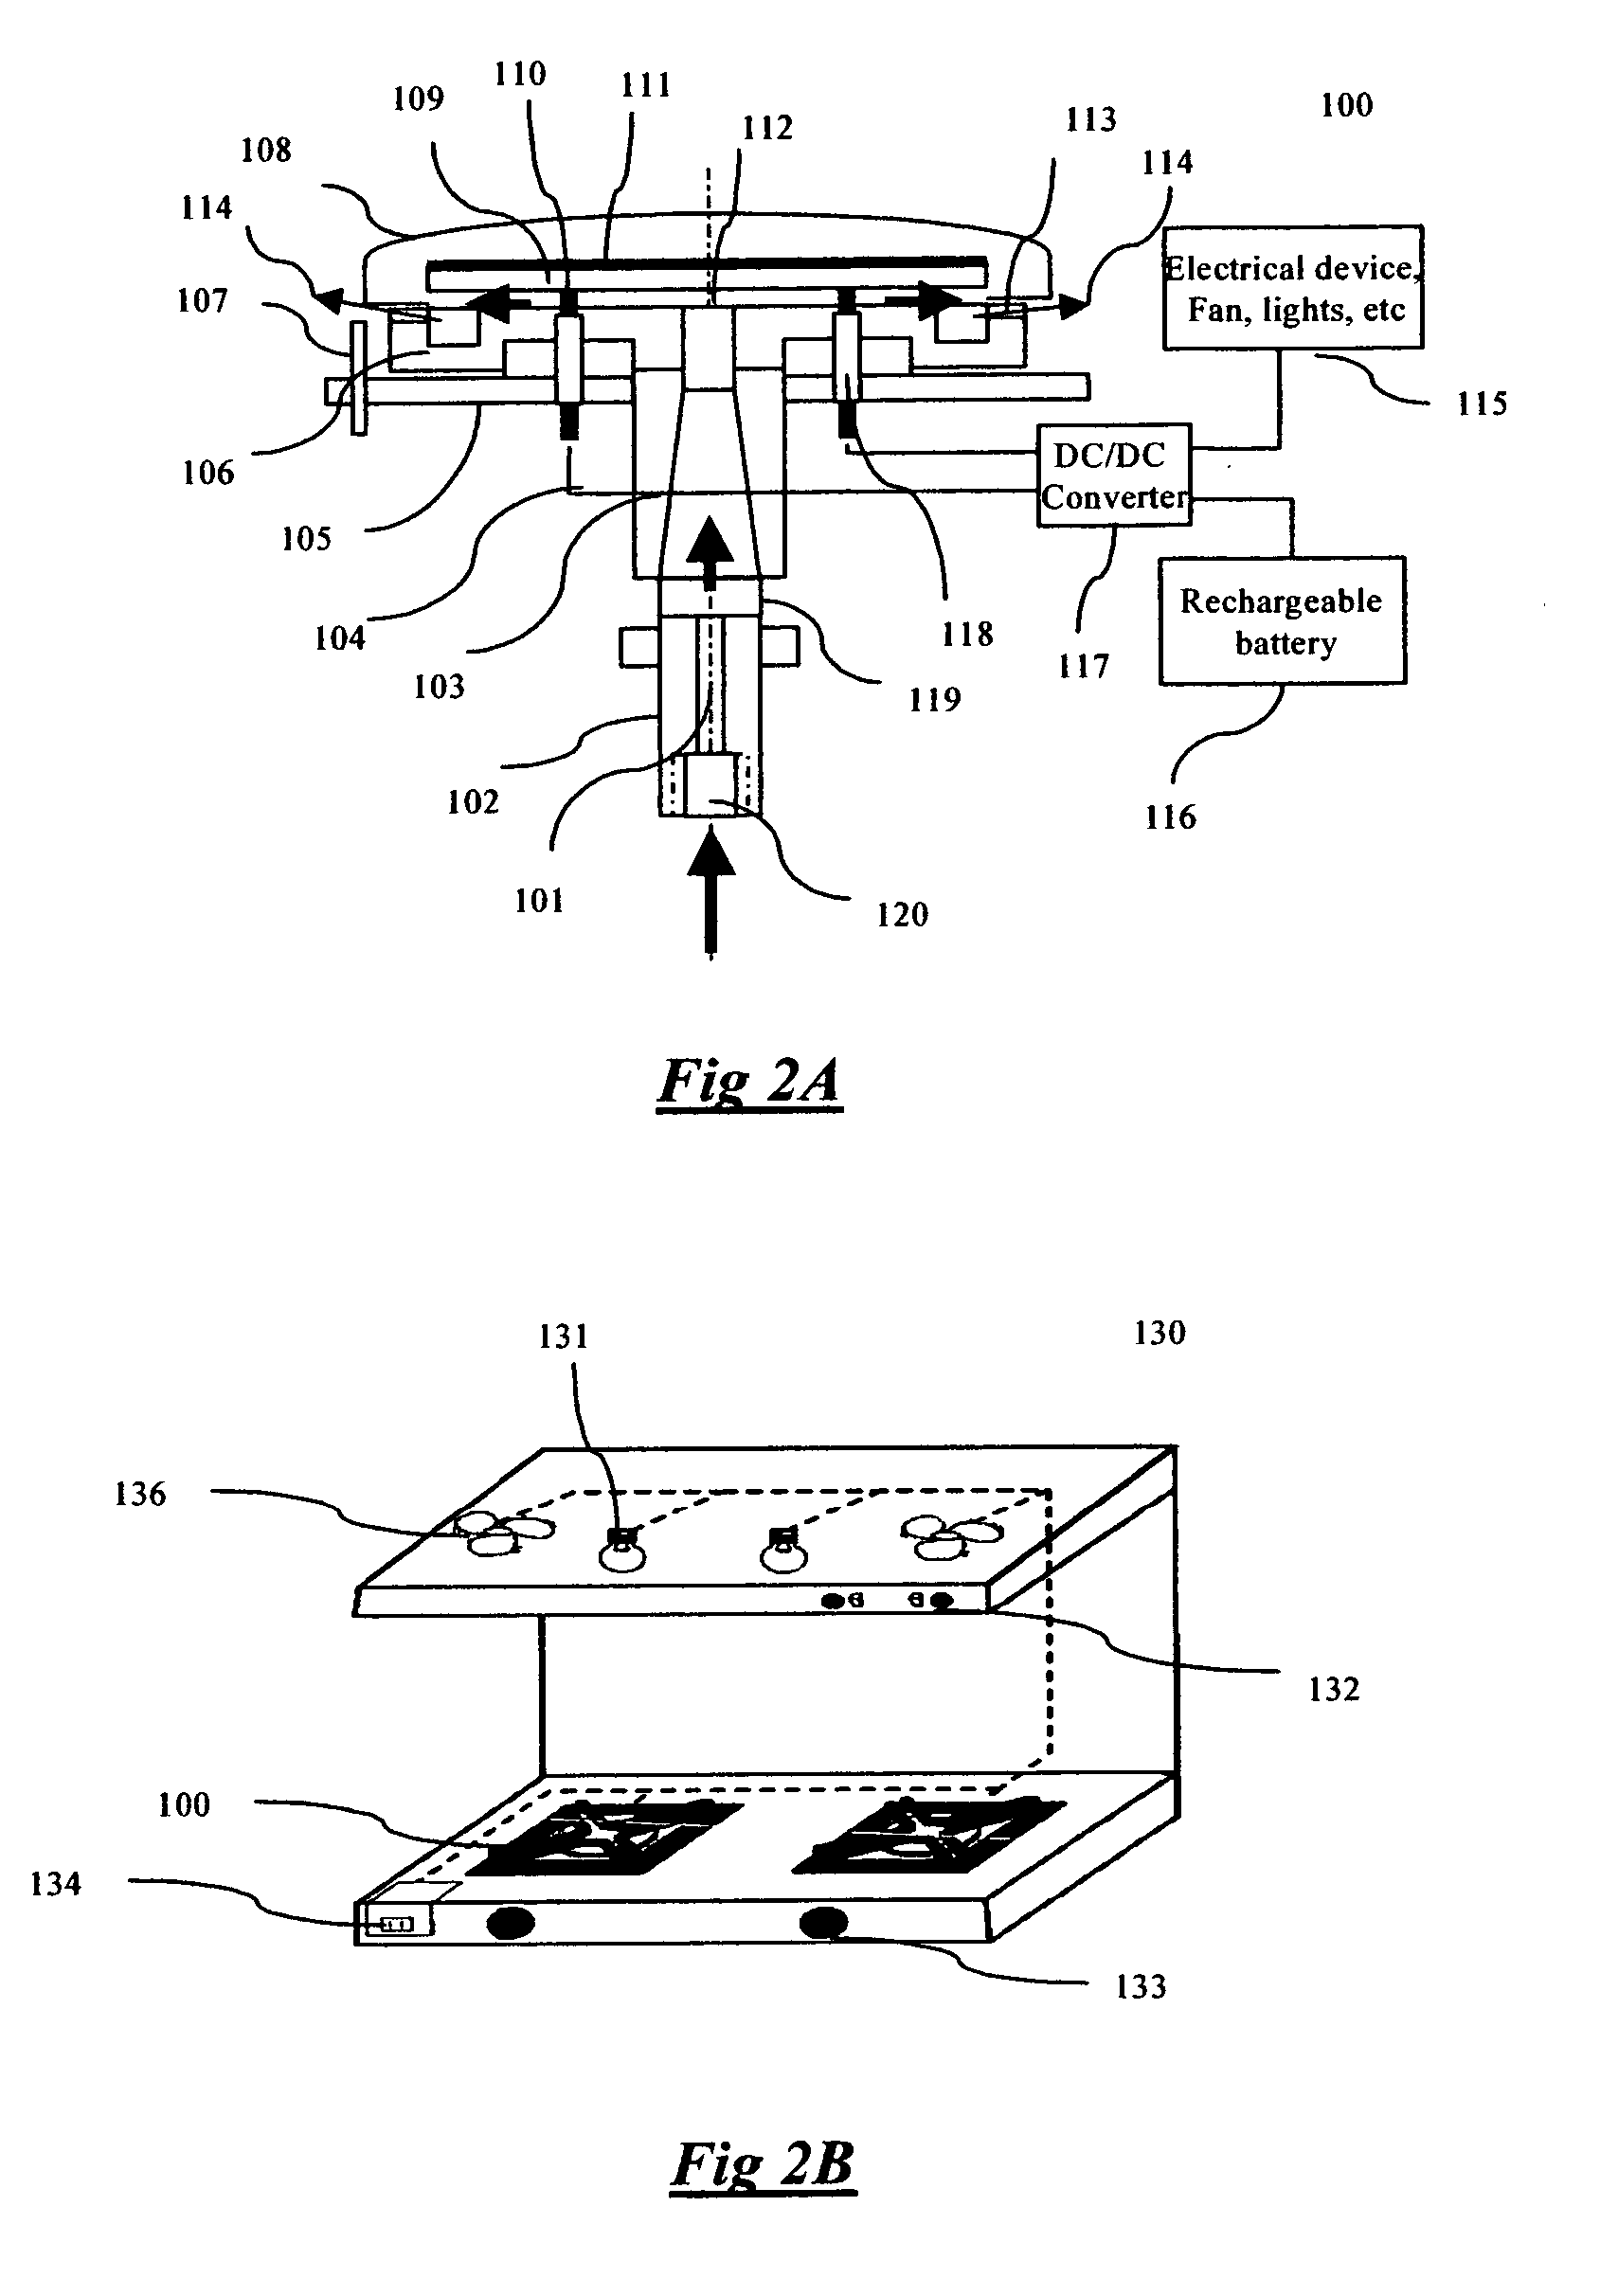 Gas stove with thermoelectric generator